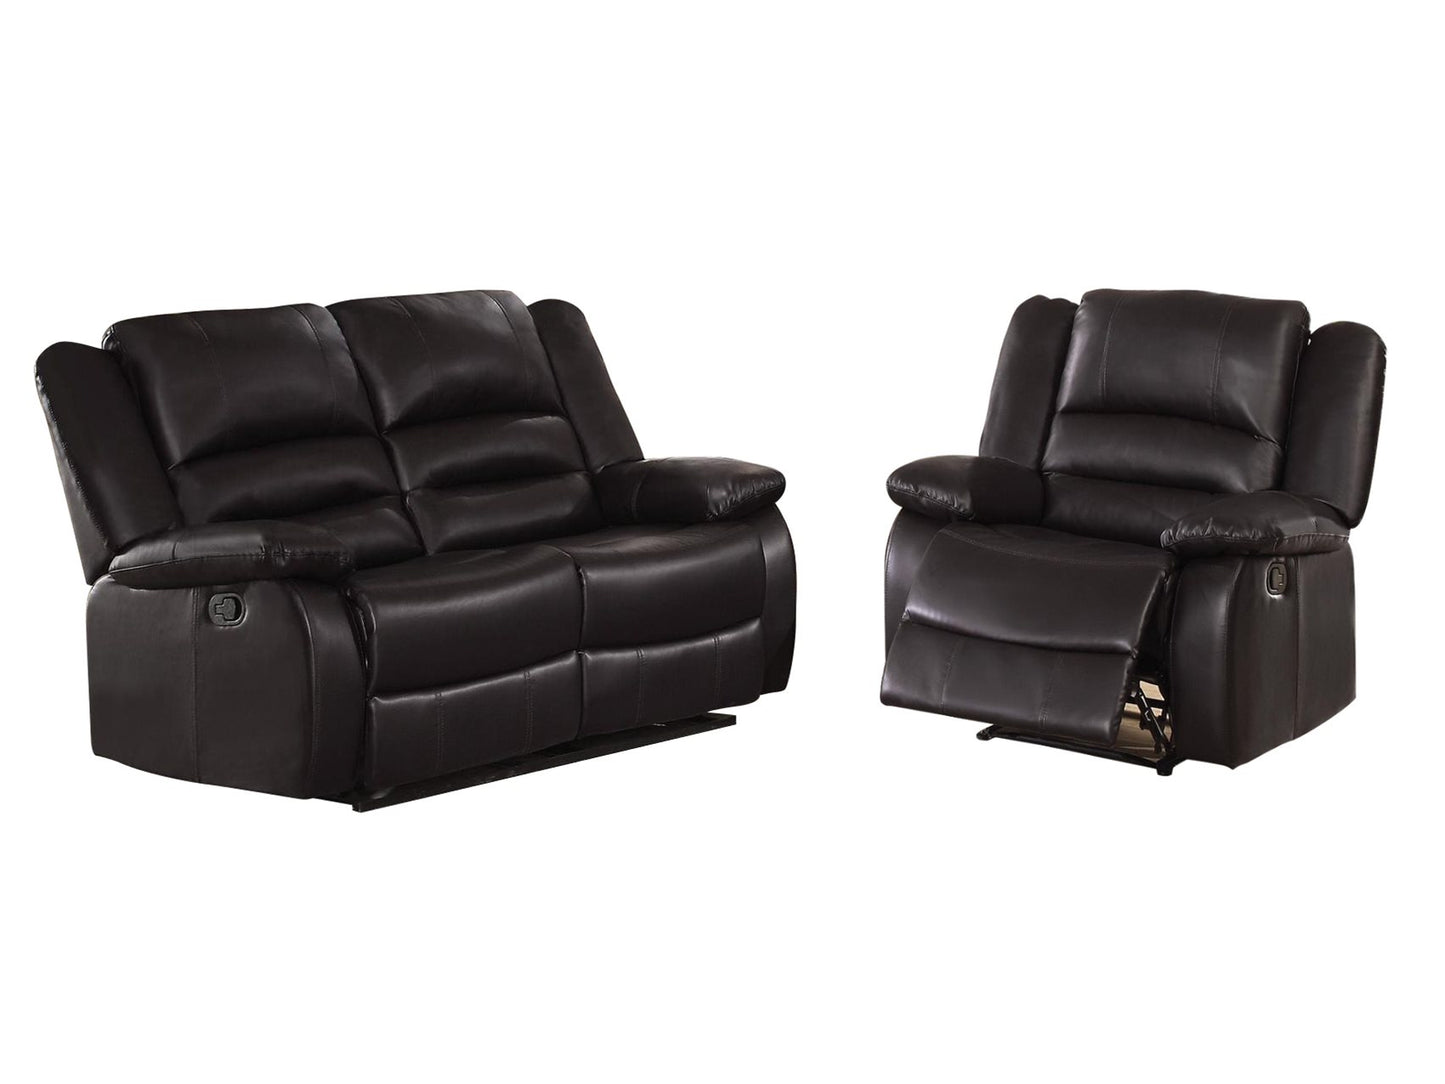 Homelegance Jarita 2PC Double Reclining Love Seat & Recliner Chair in Brown Leather